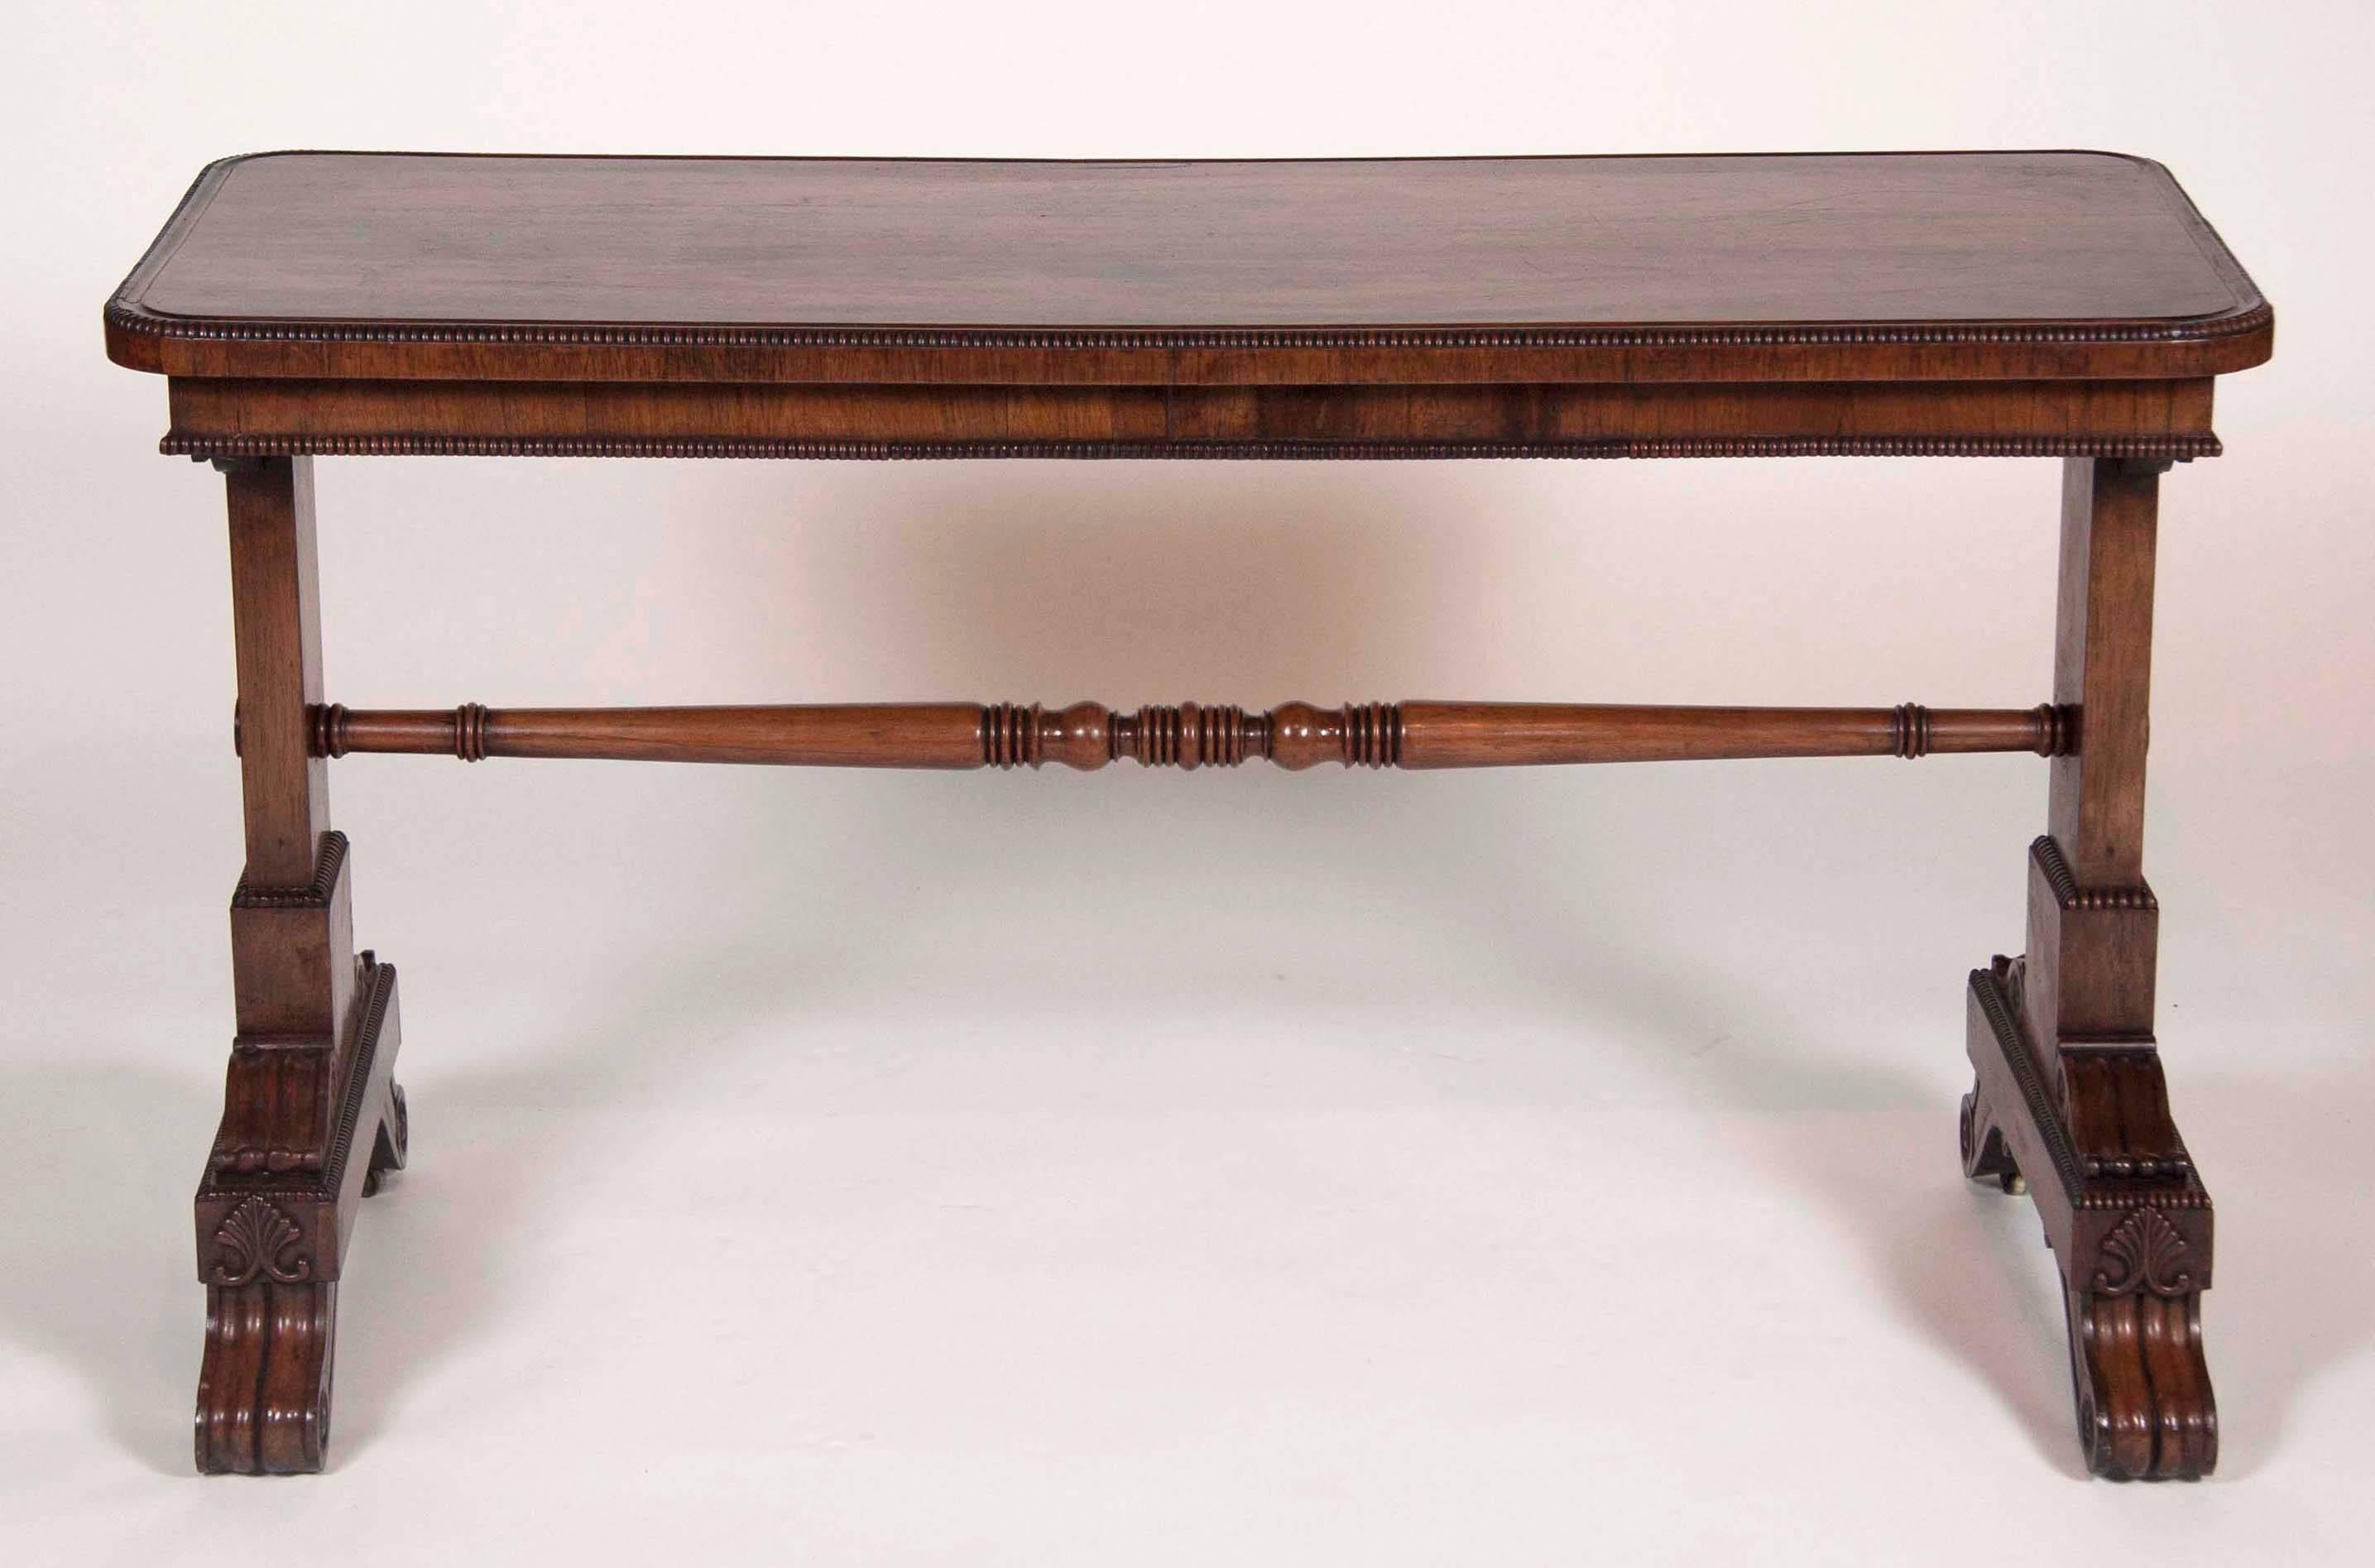 Rectangular top with carved beaded edge with a plain frieze over a trestle support and turned stretcher raised on carved scrolled feet.